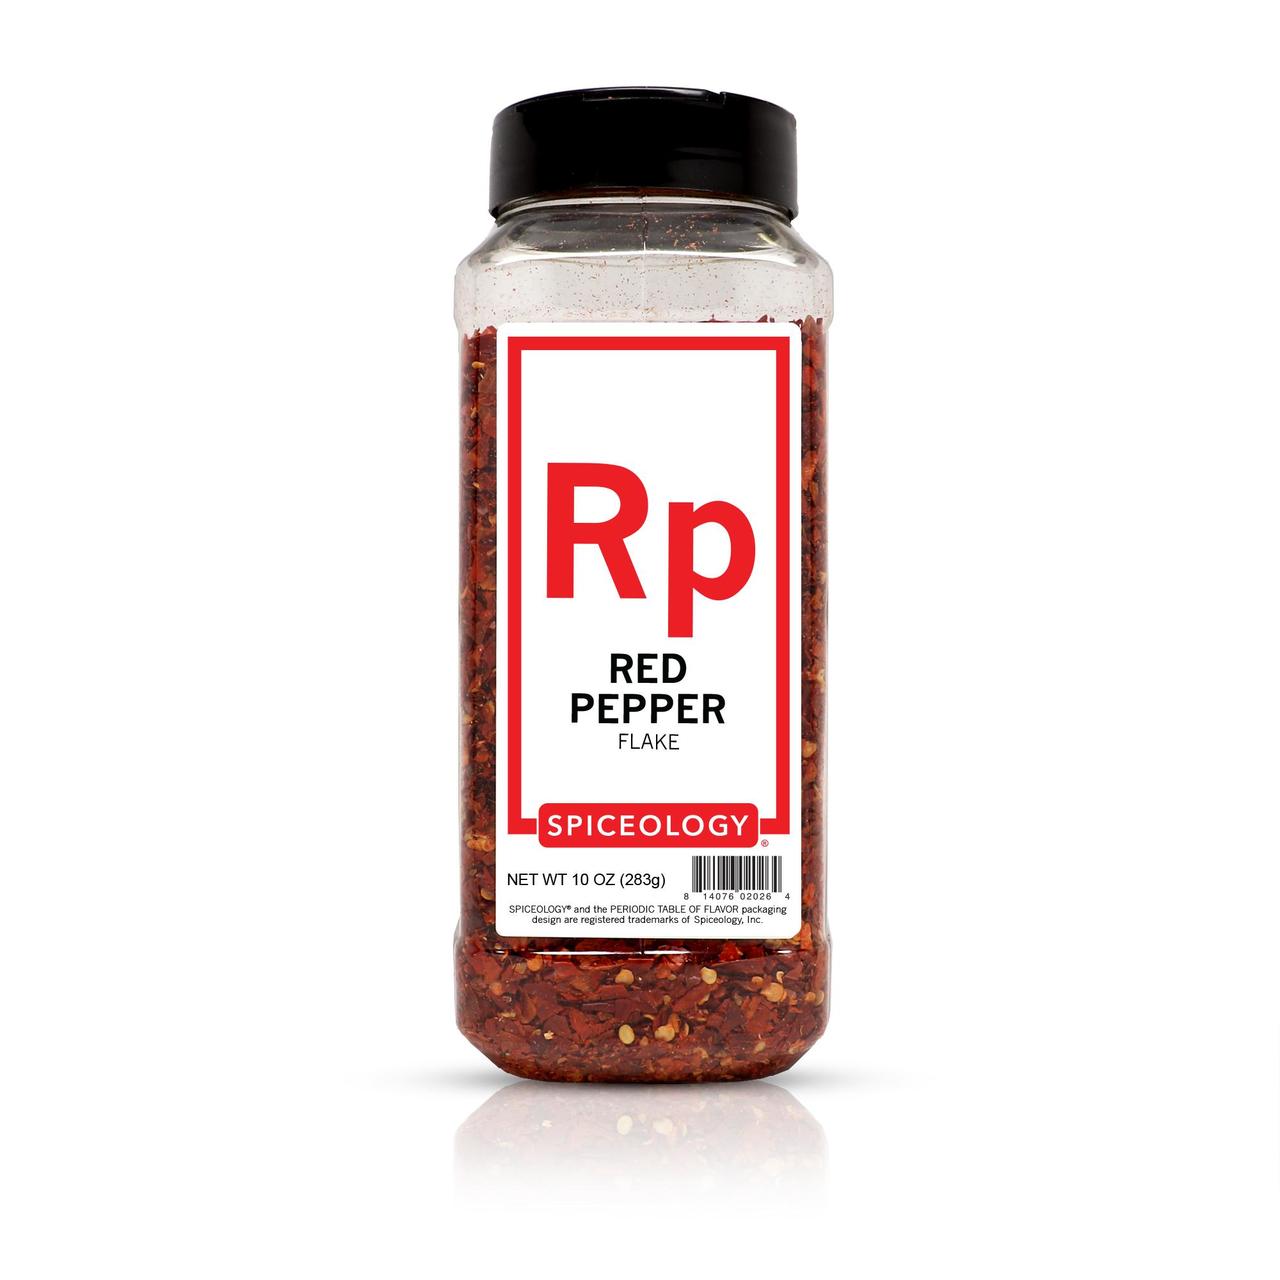 infrastruktur Logisk Match Shop Red Pepper Chili Flakes for Pizza or Italian Dishes | Spiceology